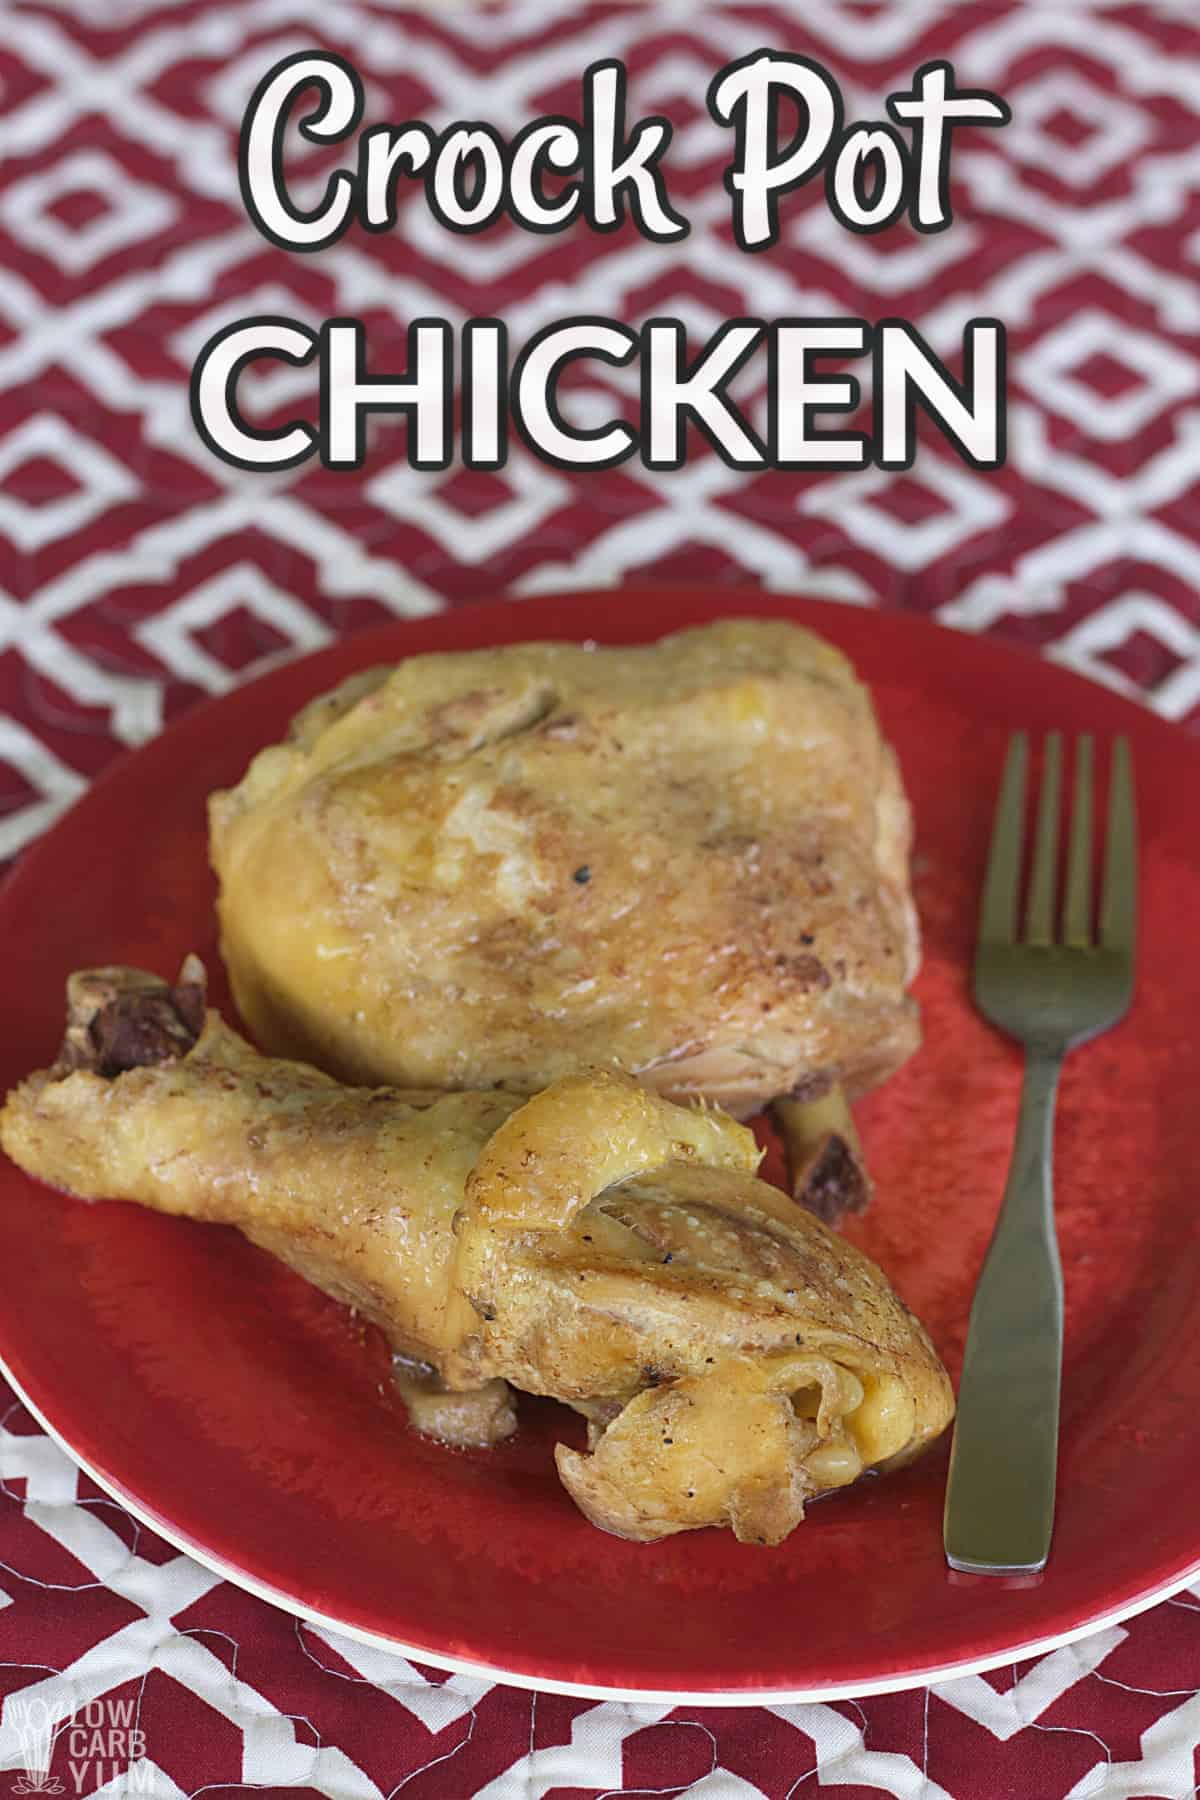 crock pot chicken legs and thighs recipe cover image